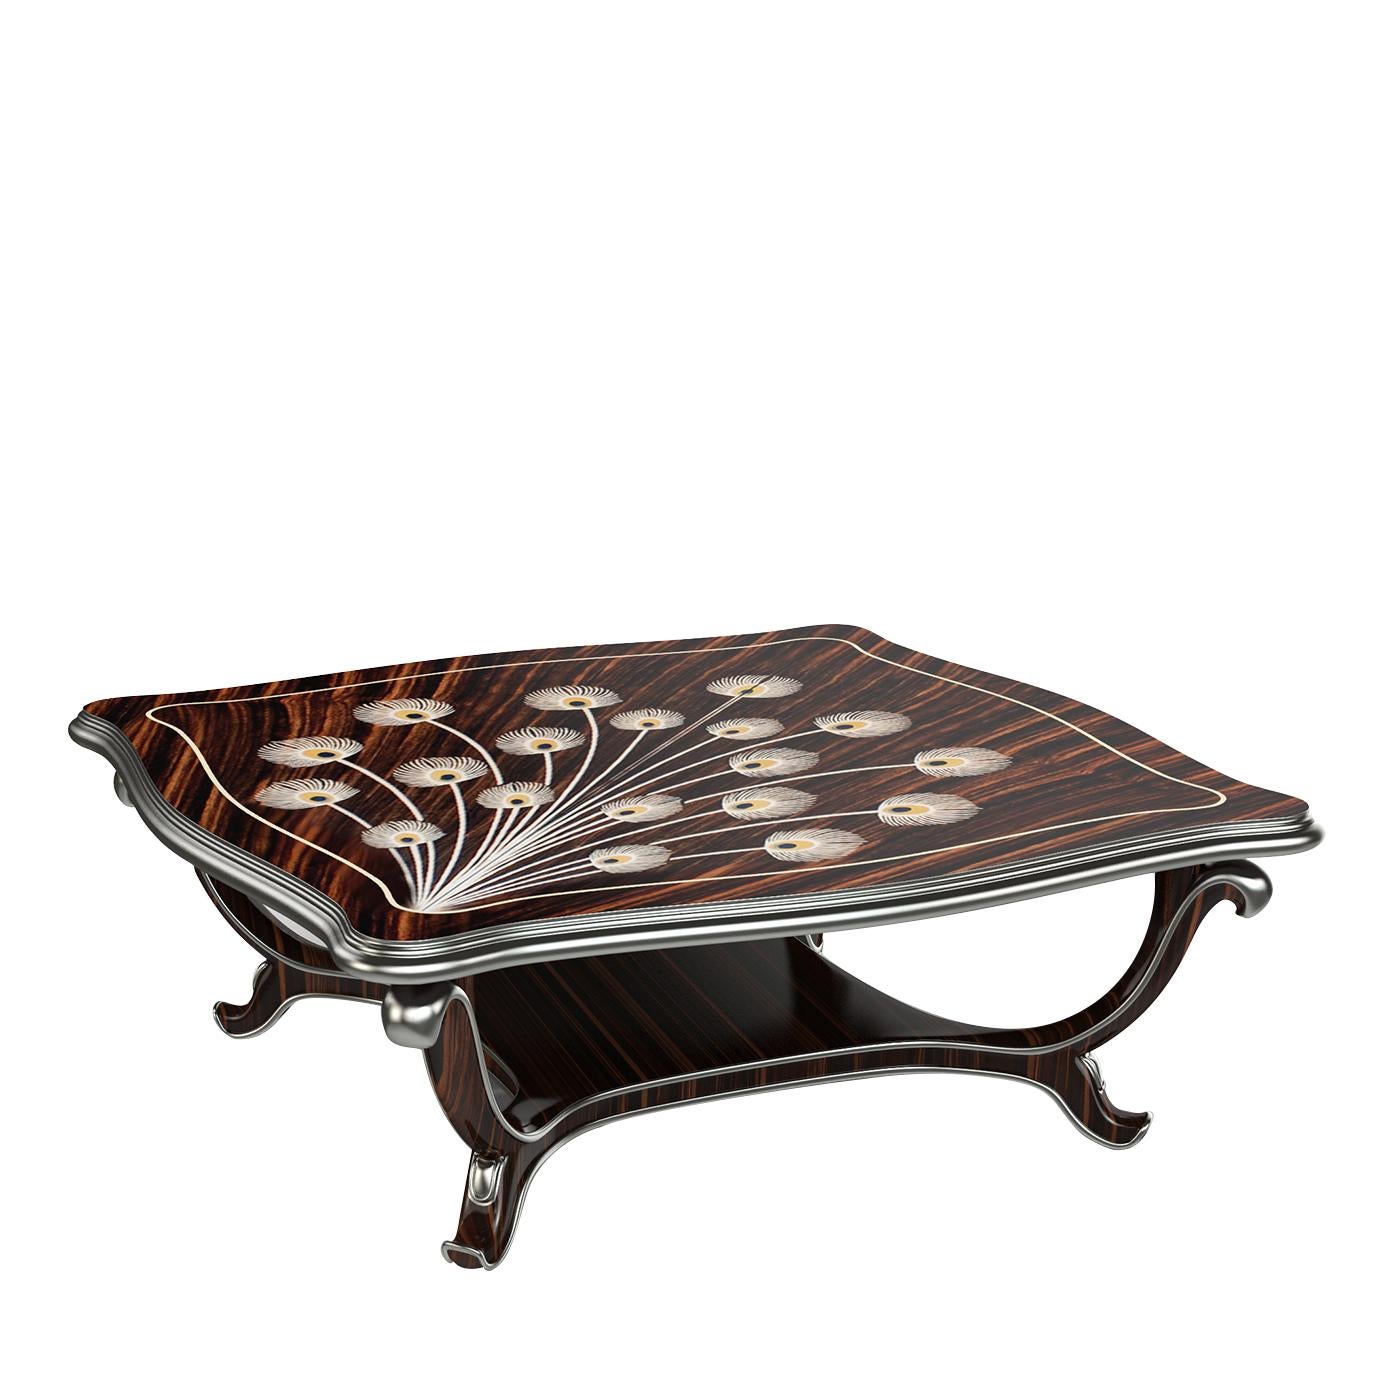 A plush and elegant piece of functional decor, this coffee table is an example of impeccable craftsmanship on refined, exclusive materials. Made of Makassar ebony, the top boasts superb wooden marquetry, resting on a sinuous and regal, Art Deco